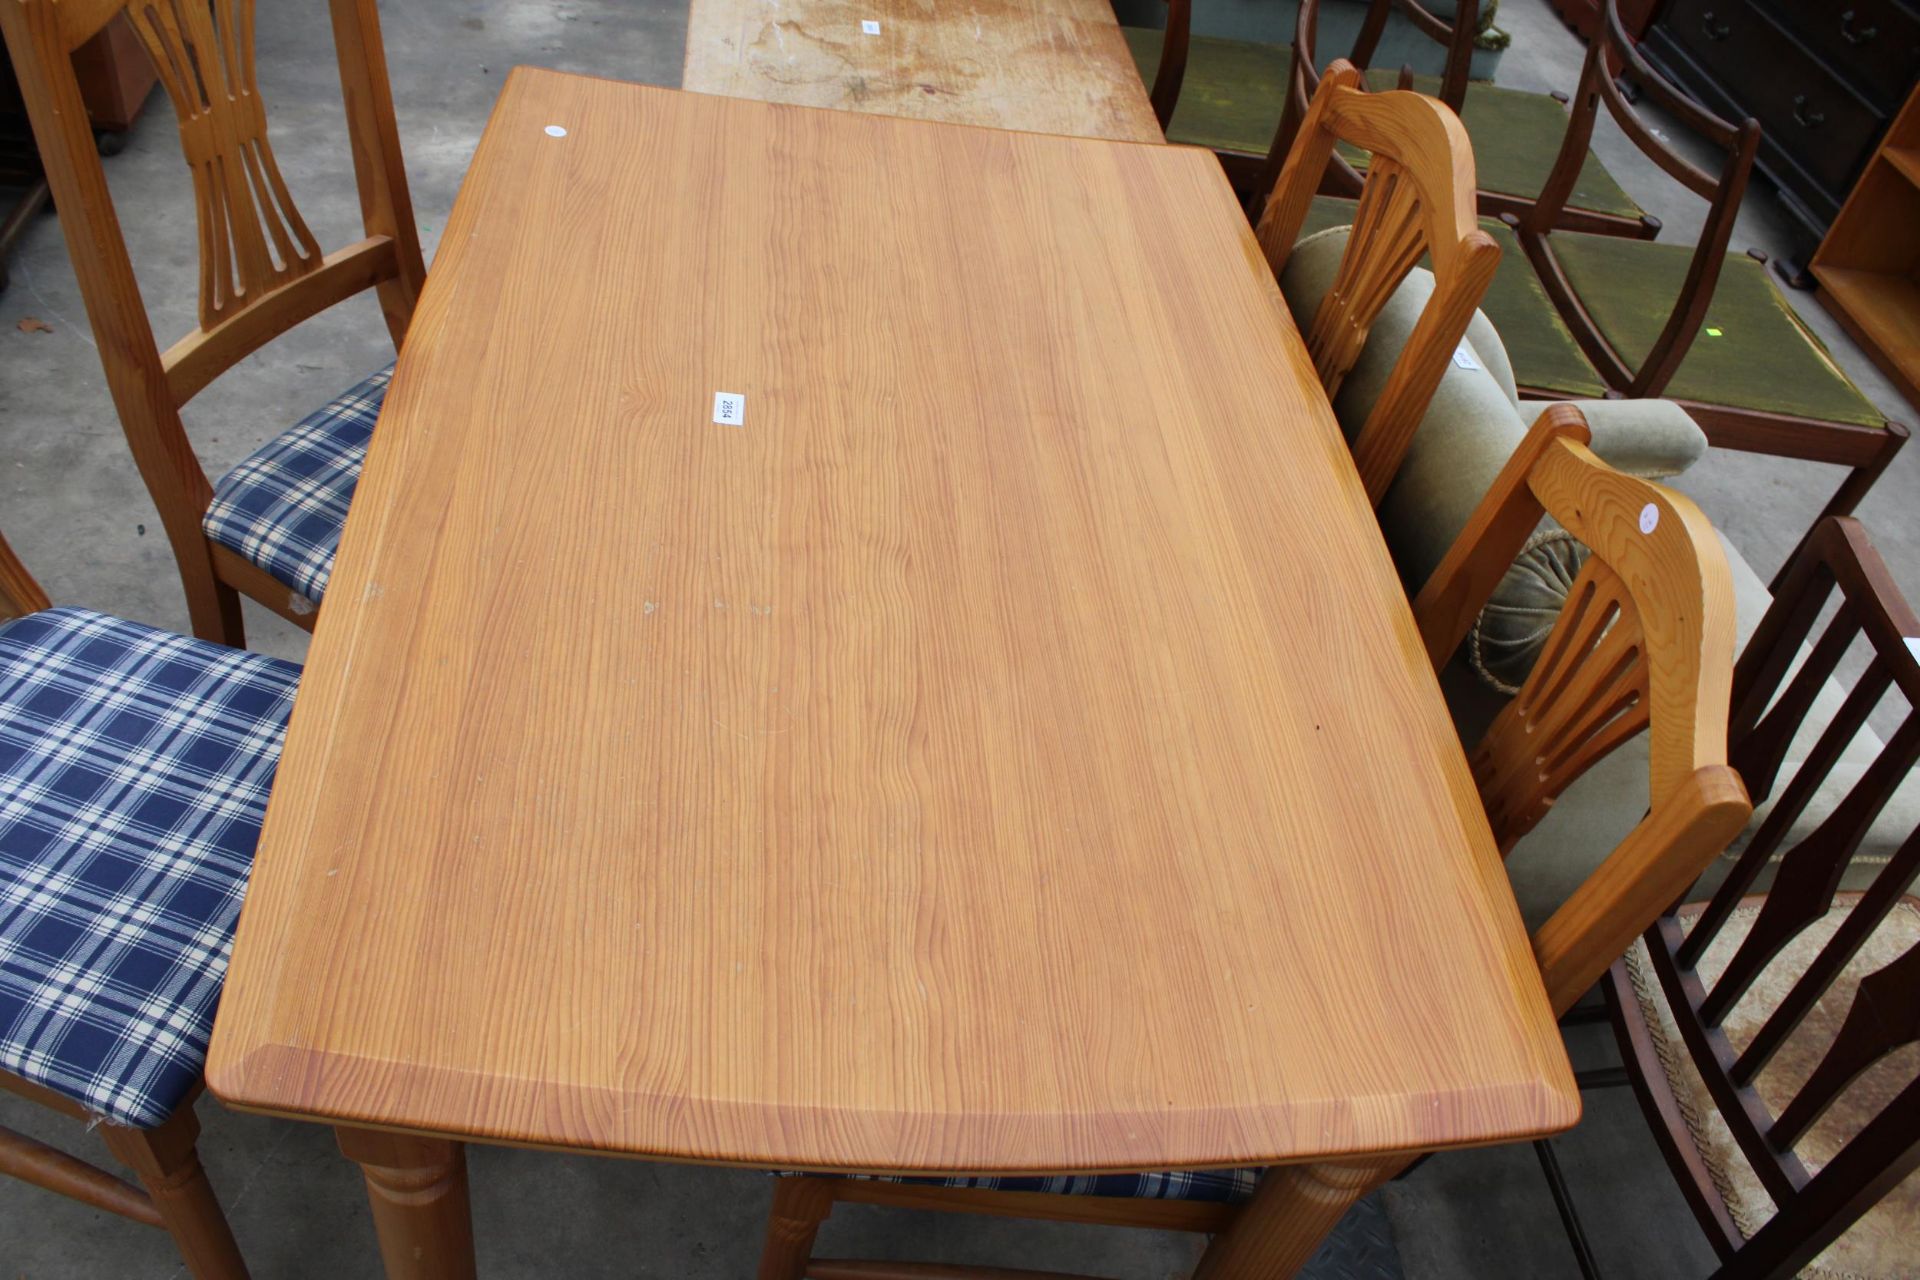 A PINE DINING TABLE 45" X 29" AND FOUR CHAIRS - Image 4 of 4